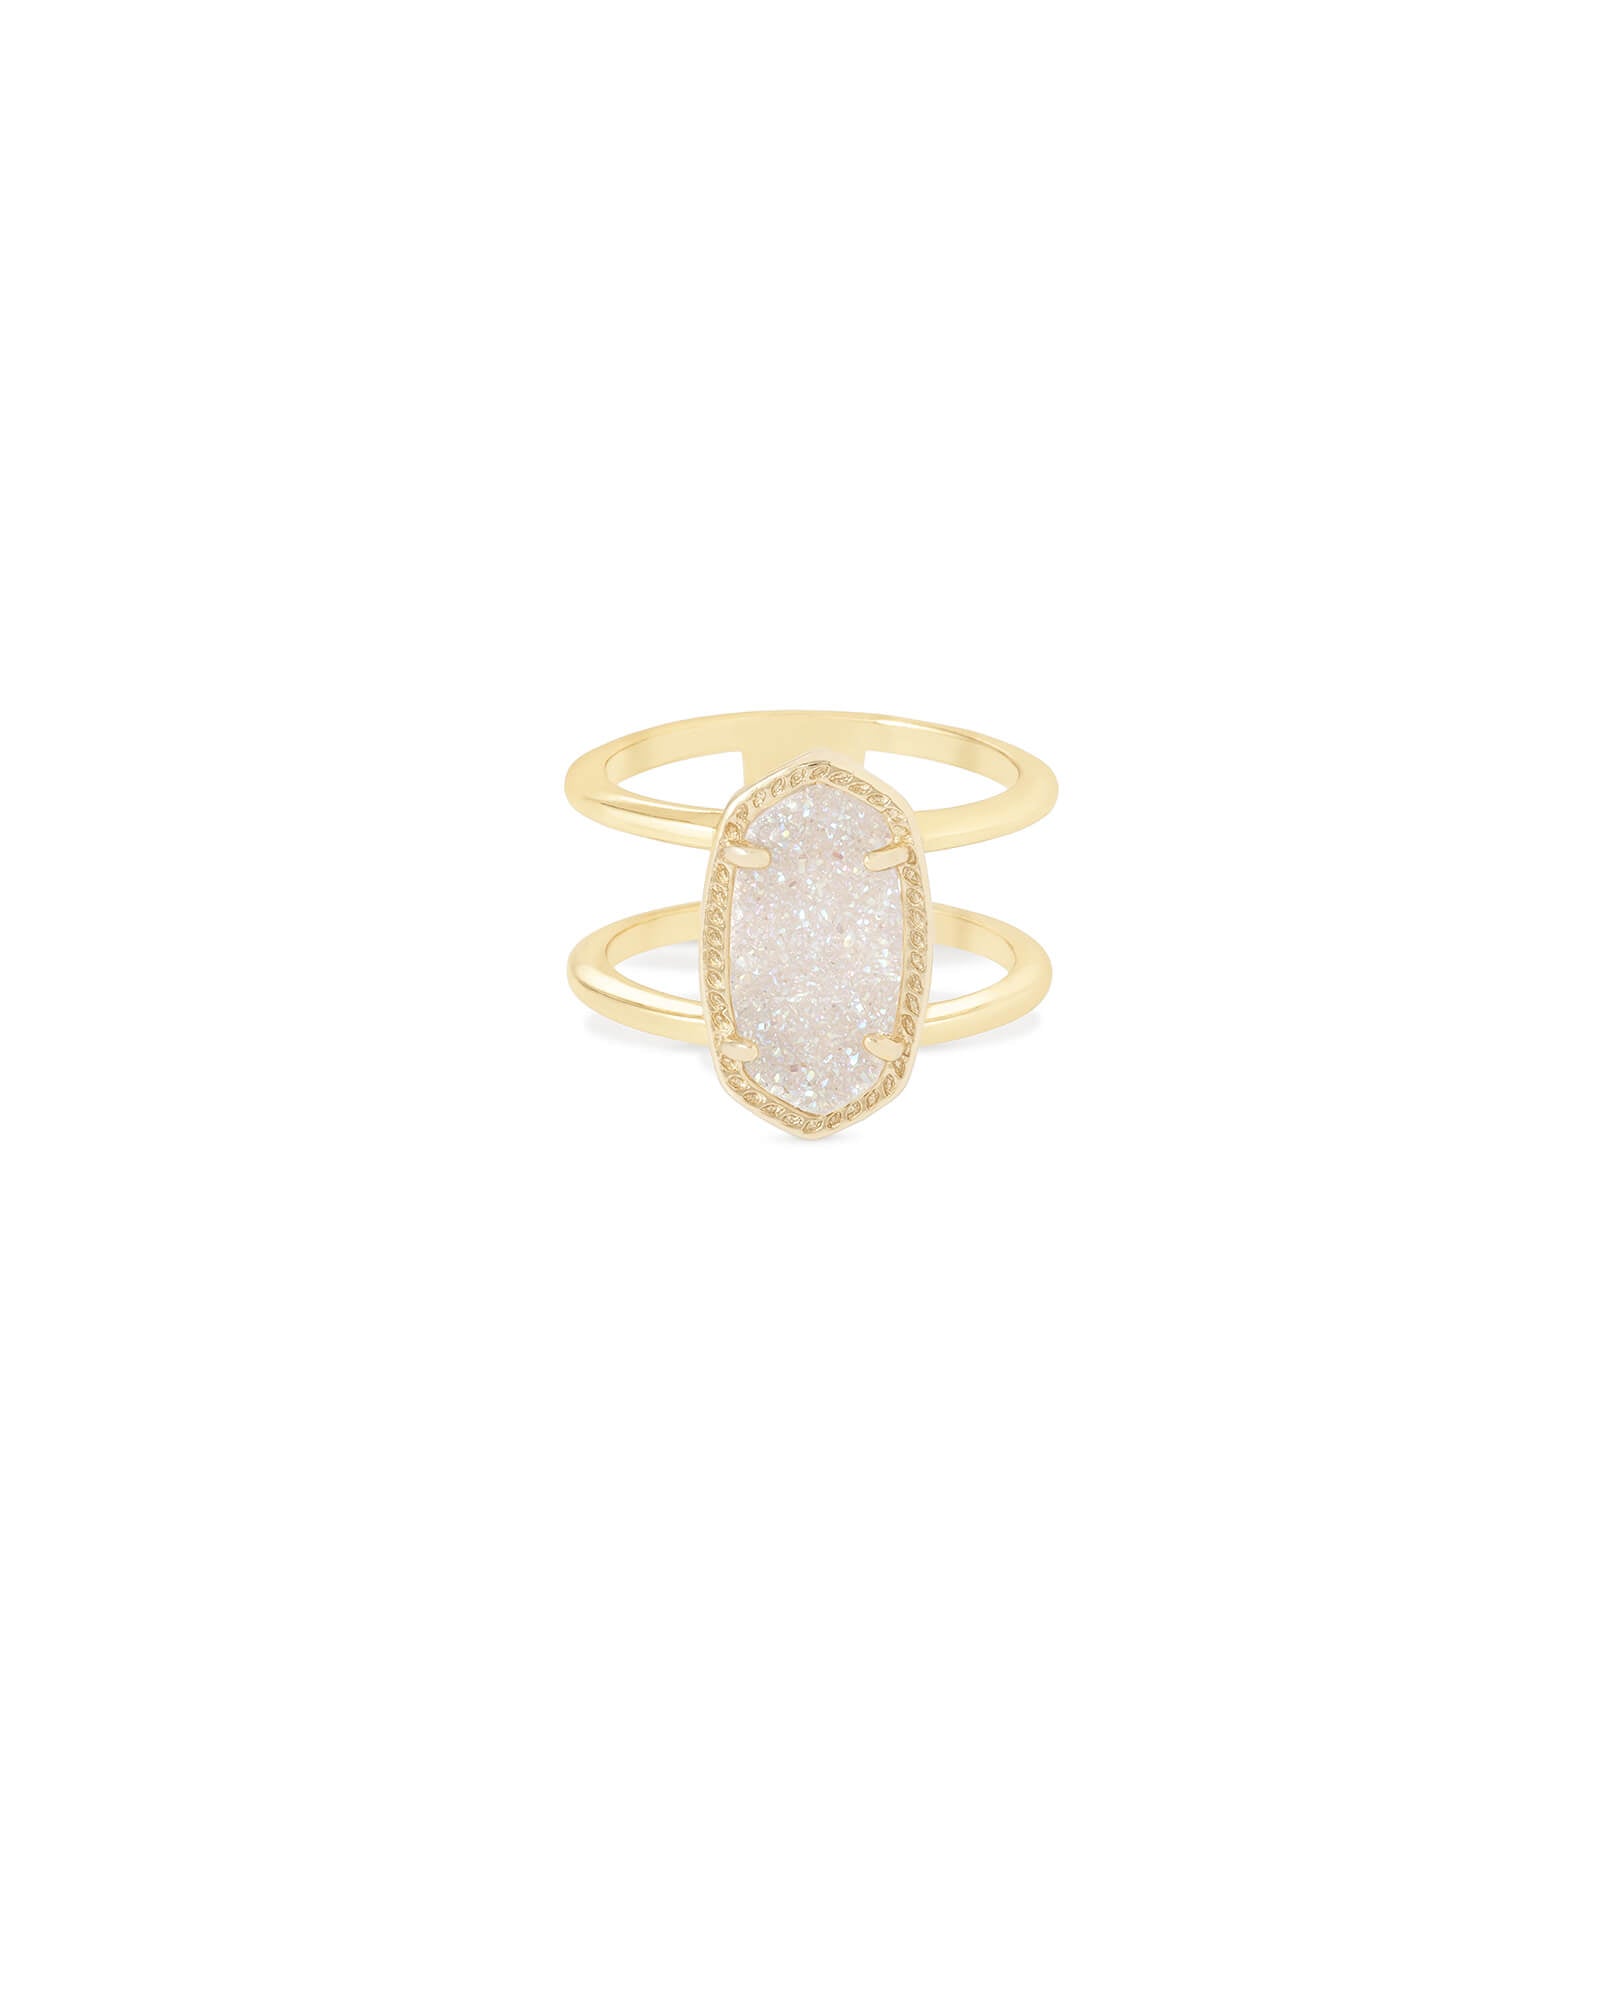 Elyse Ring - Iridescent Drusy in Gold